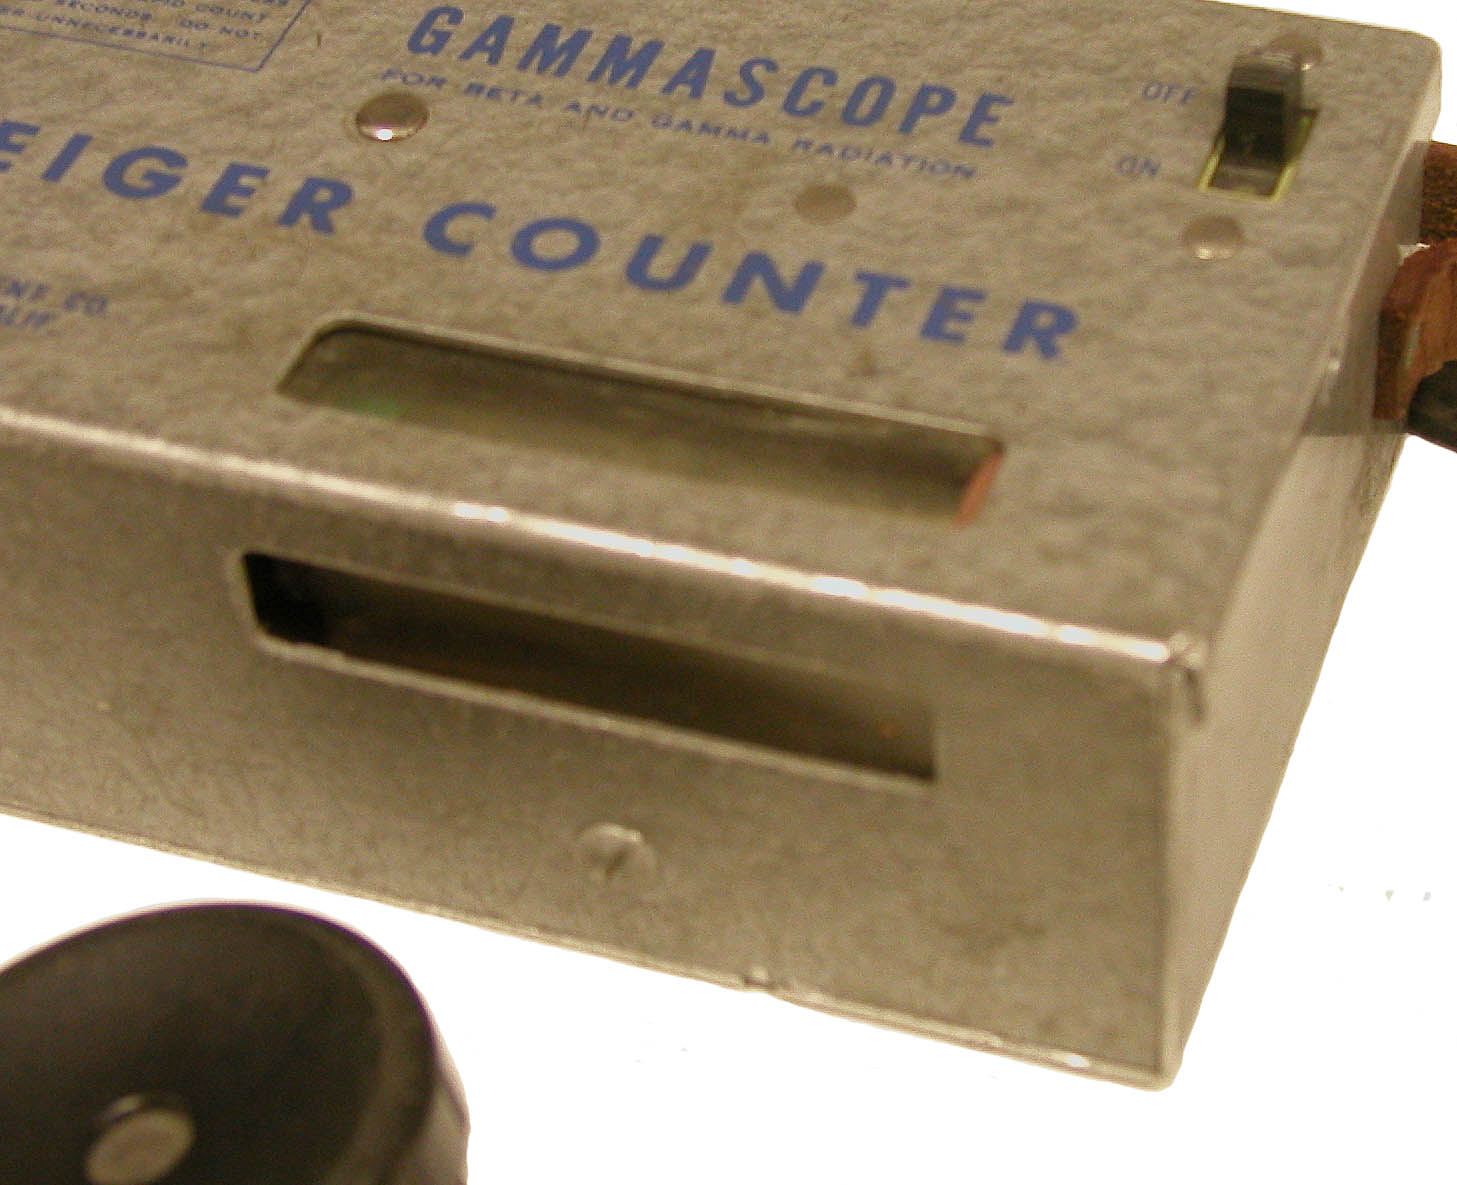 Shelby Instrument Company "Gammascope" Geiger Counter (ca. 1955)